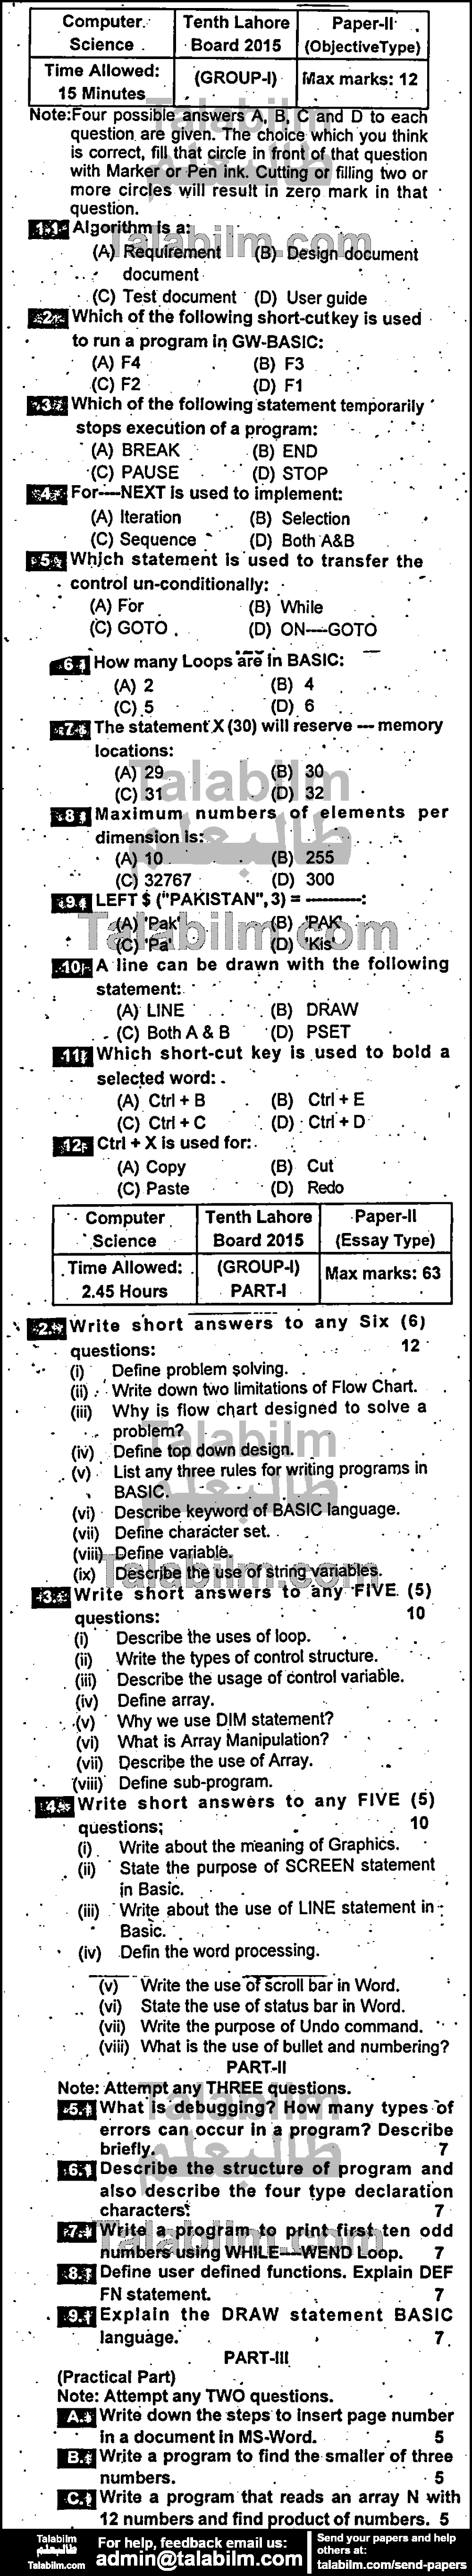 Computer Science 0 past paper for English Medium 2015 Group-I